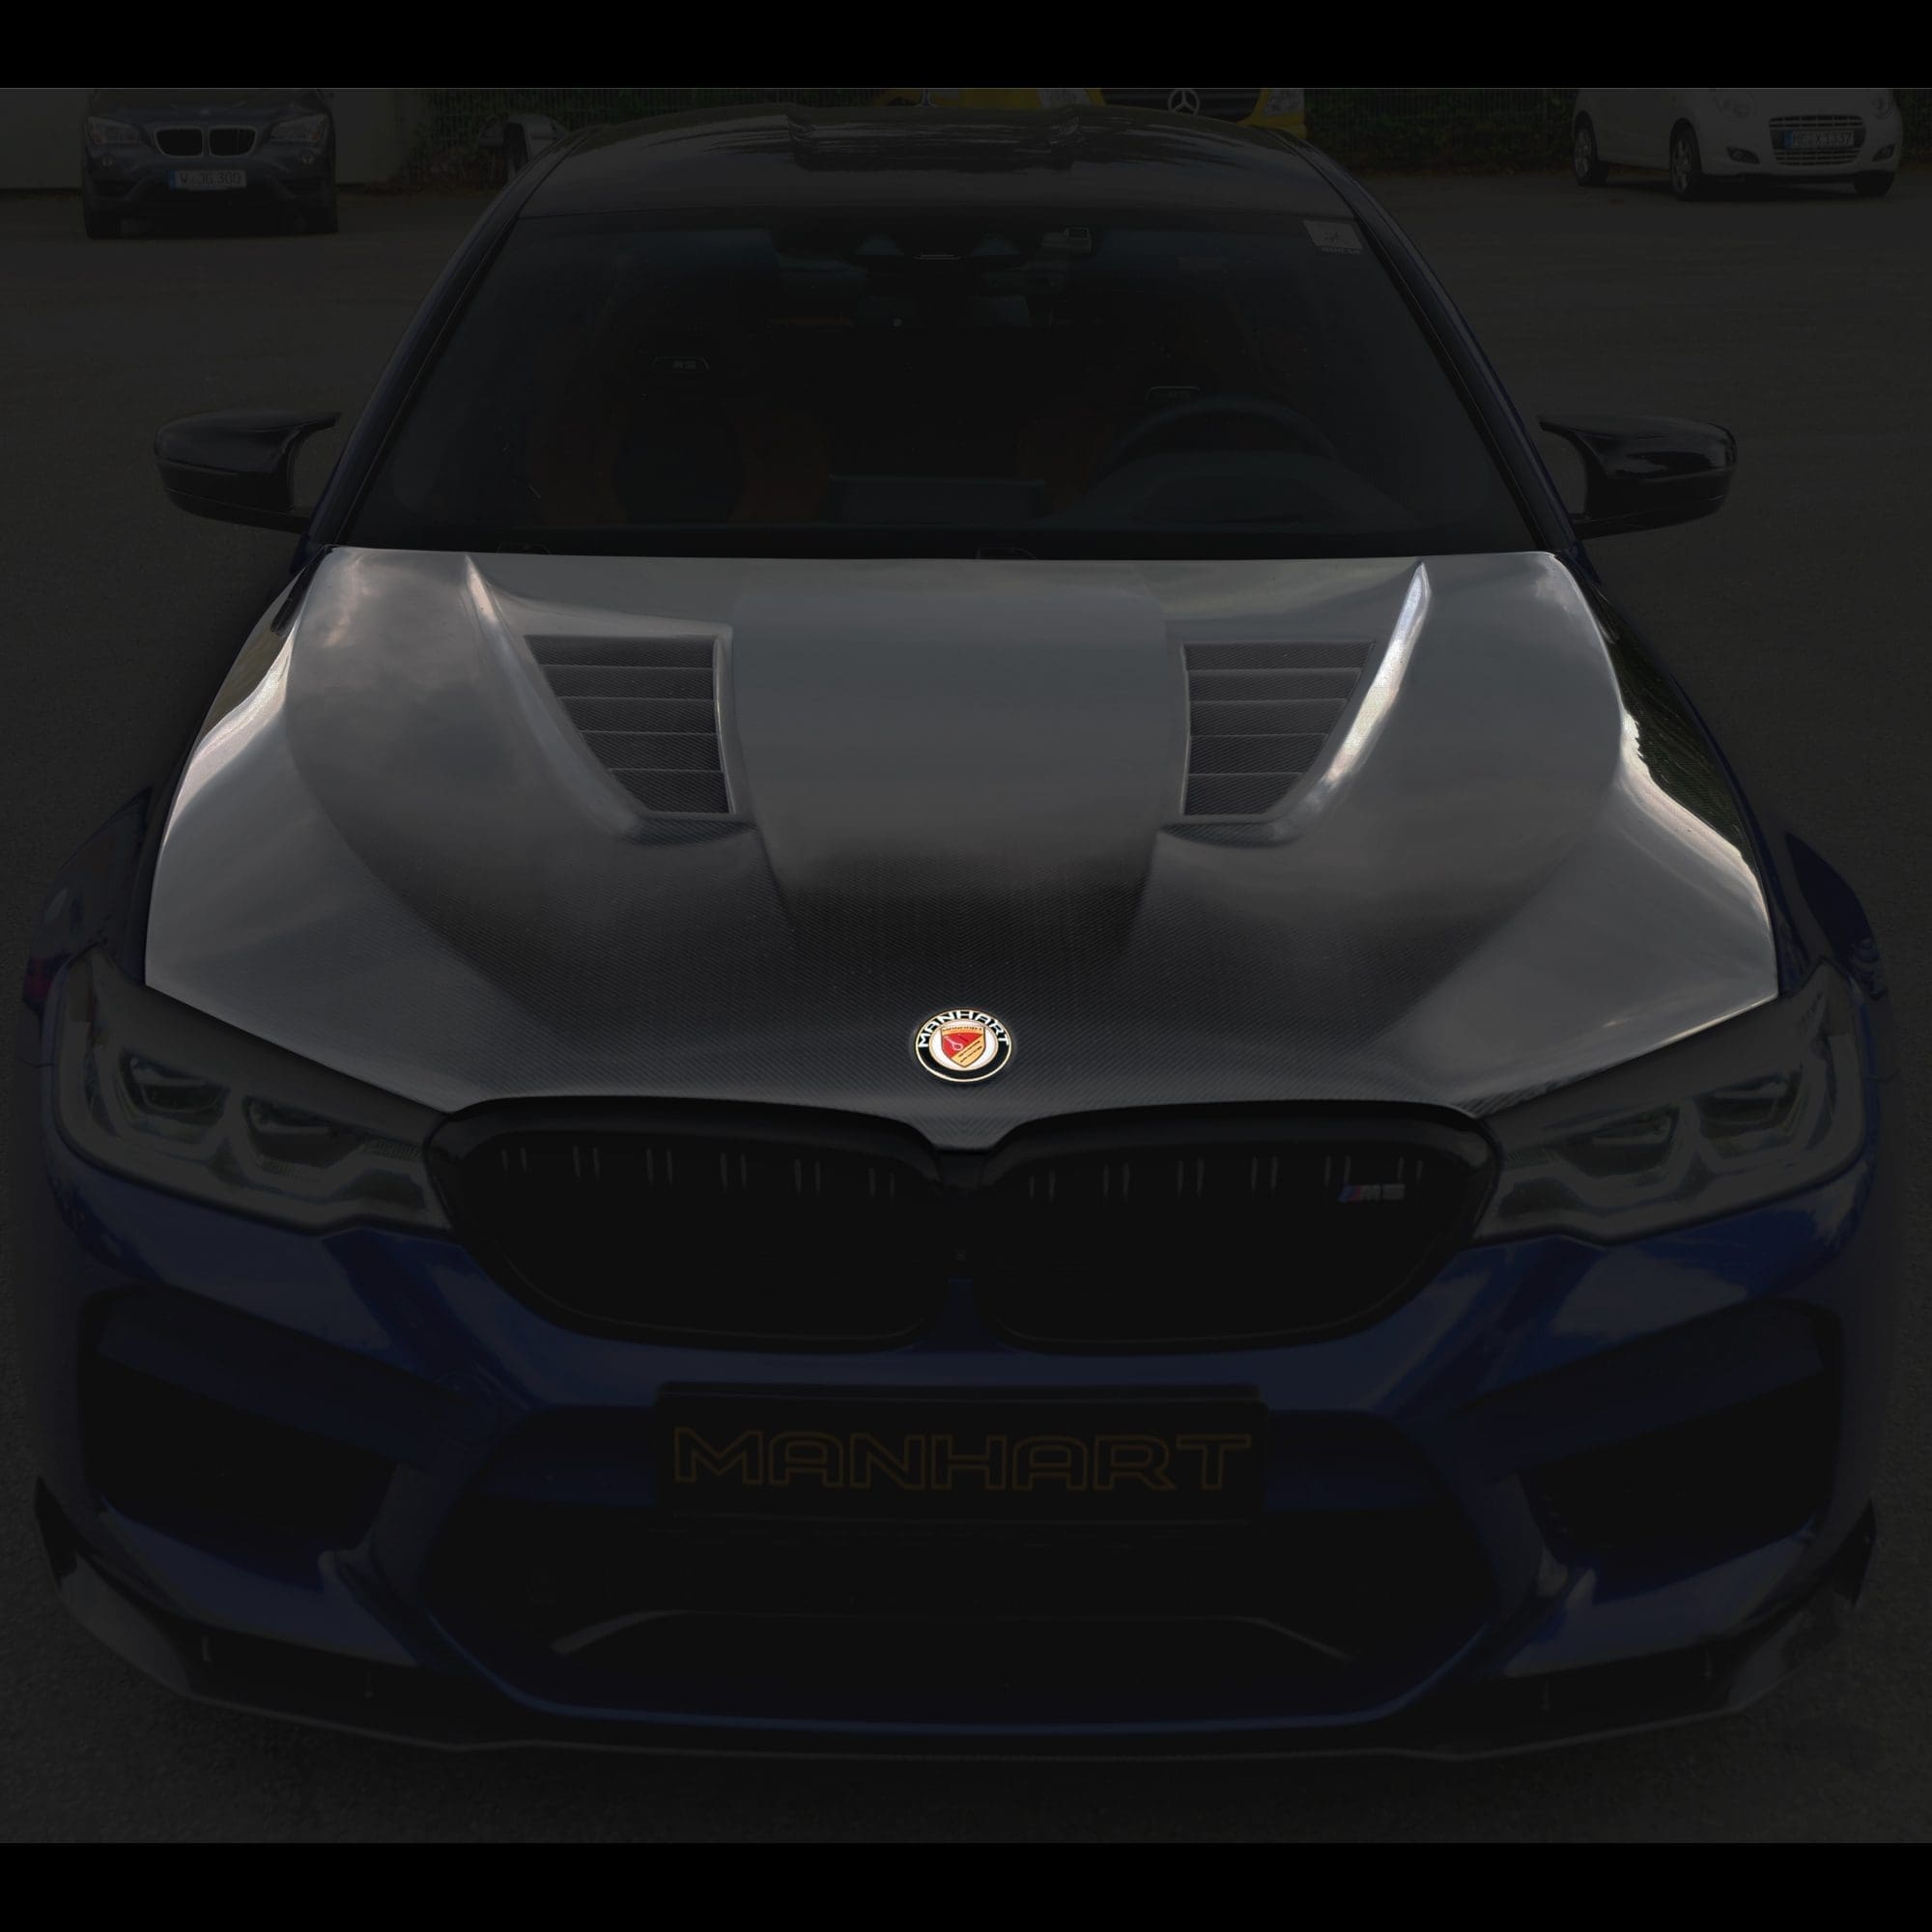 MANHART Carbon Hood for BMW F10 M5 (Competition) with GTR Air-Vents -  MANHART Performance - True High Performance Cars